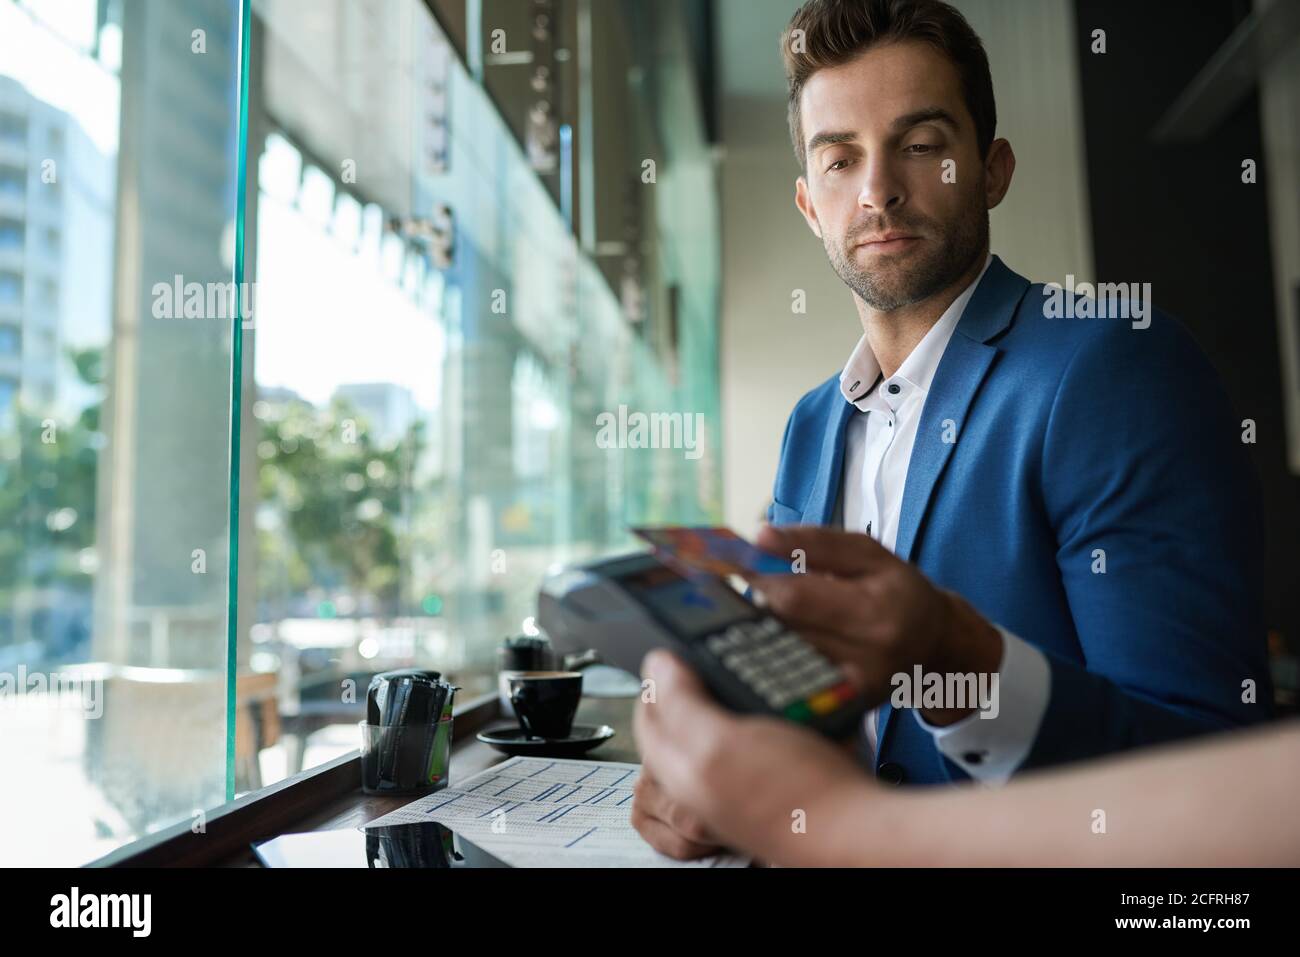 Man paying his waiter with a card and nfc technology Stock Photo